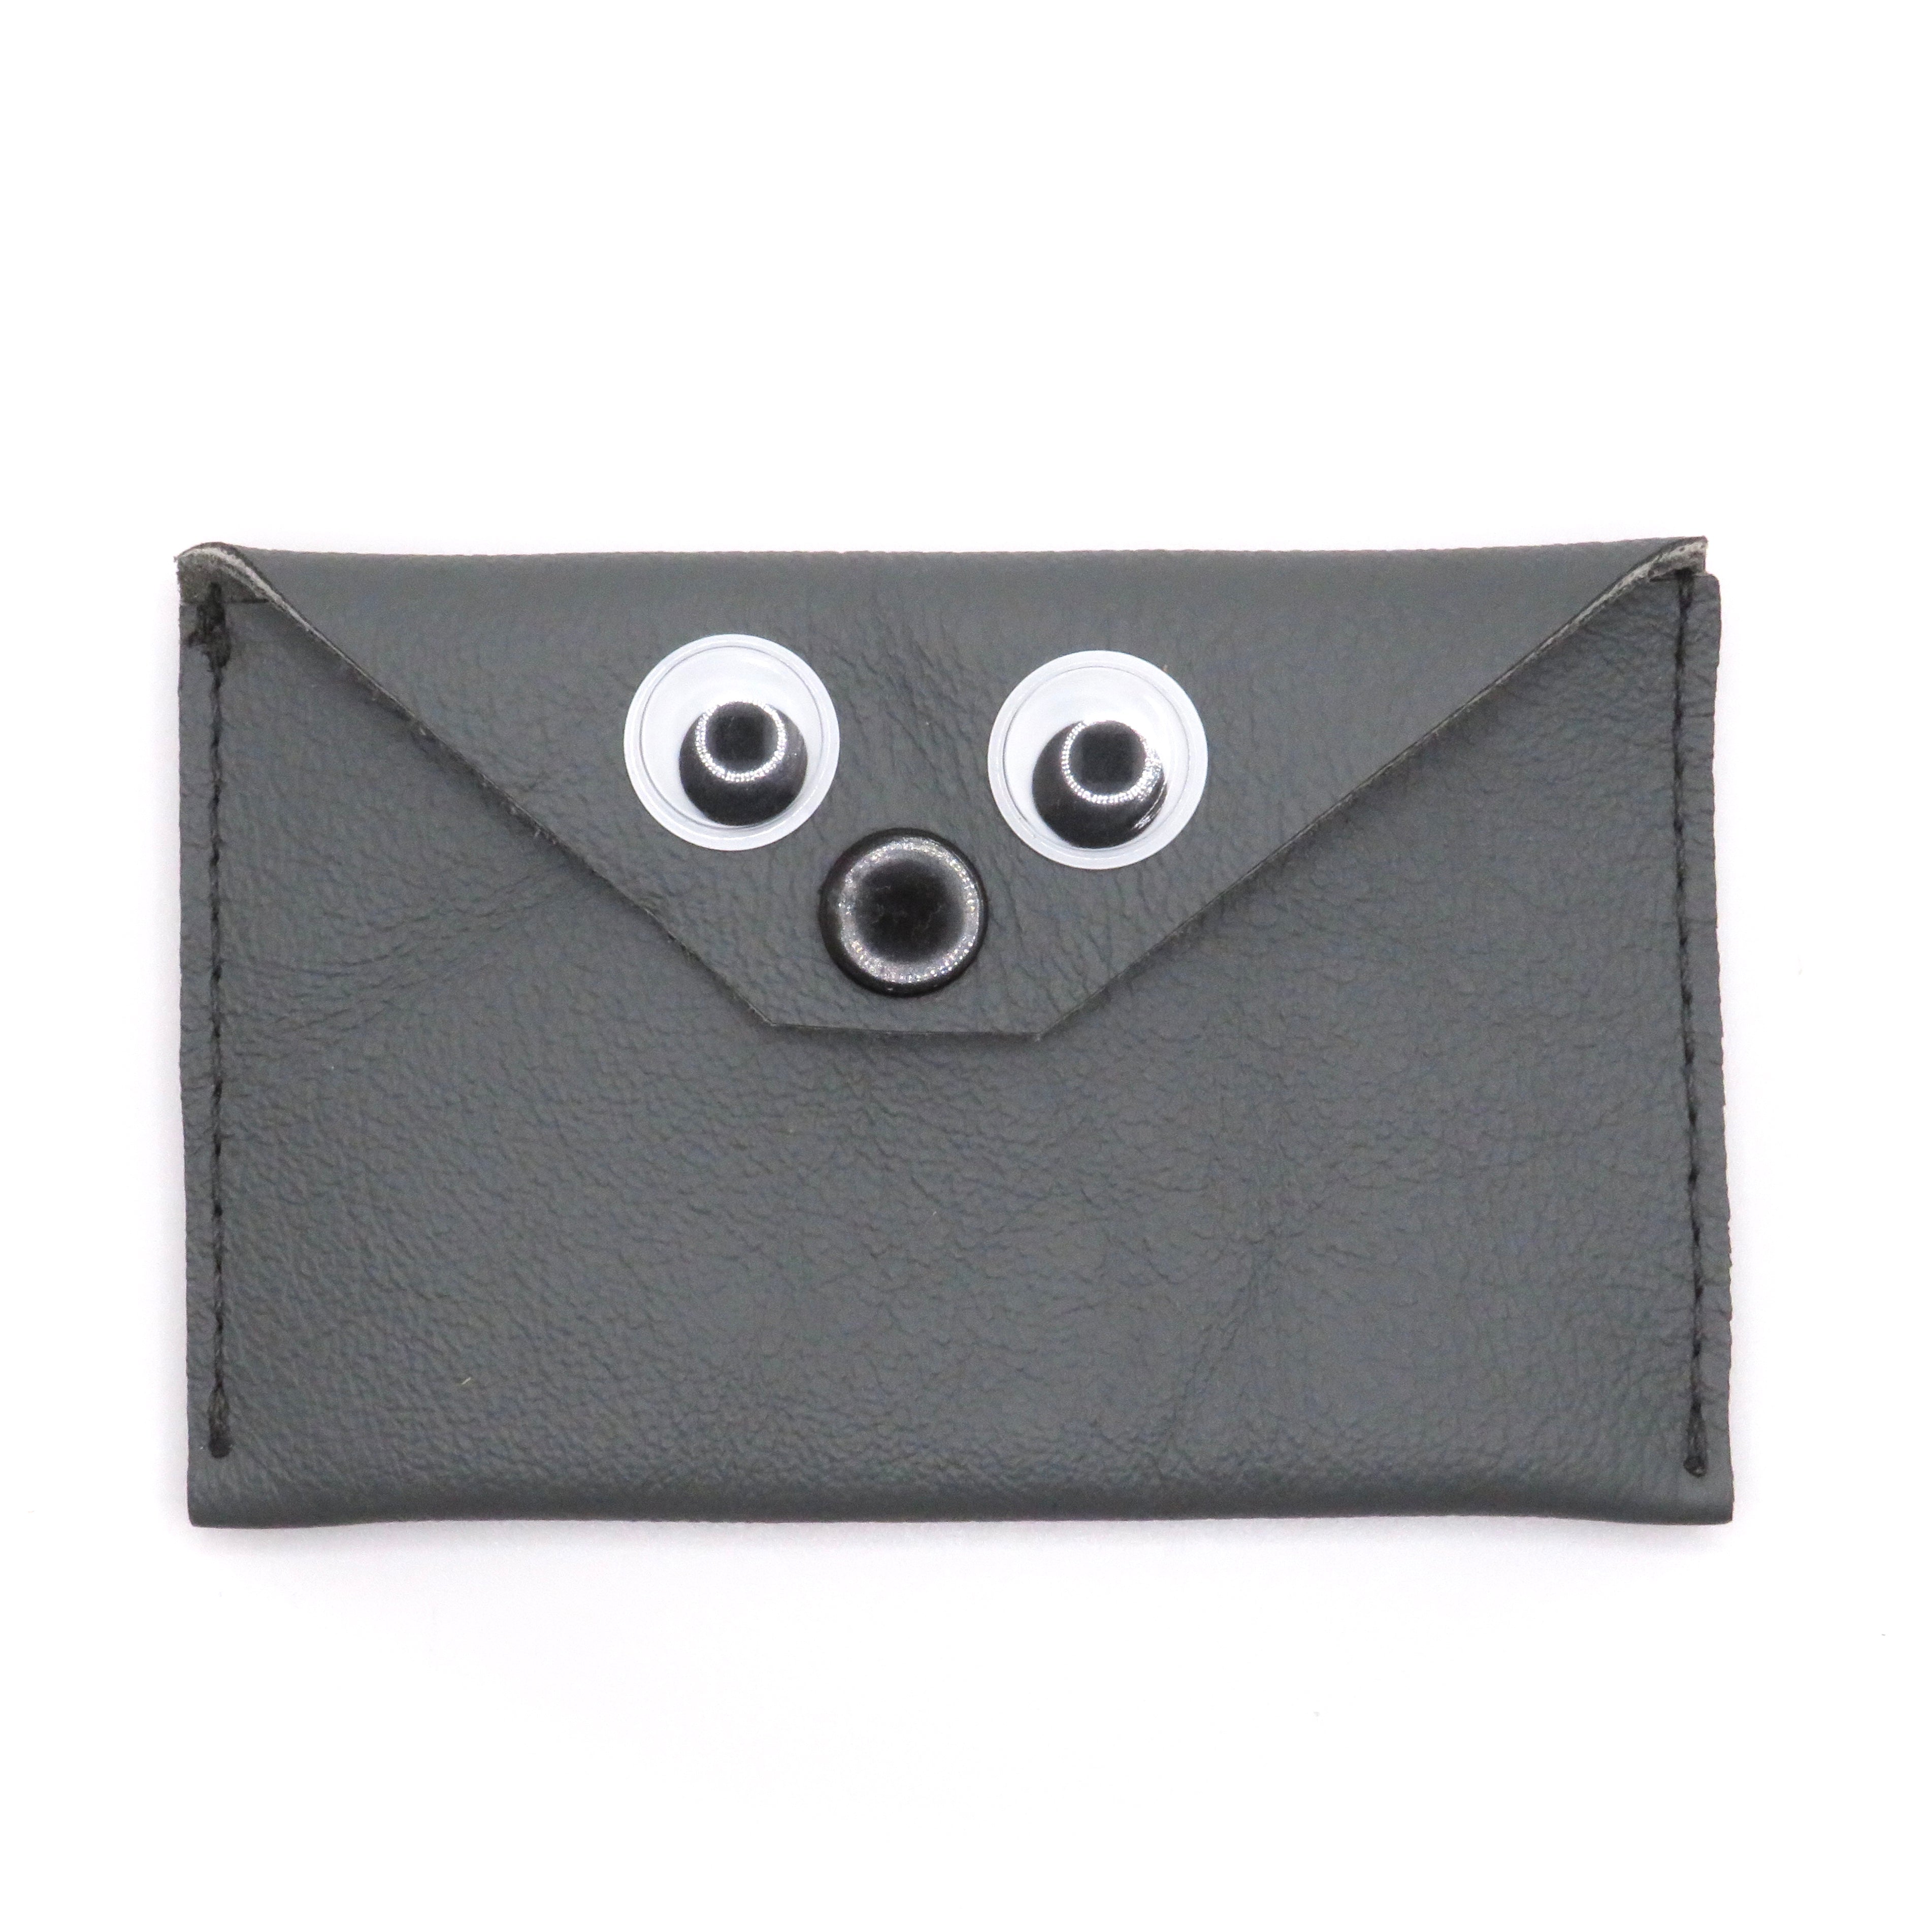 handmade black leather pouch